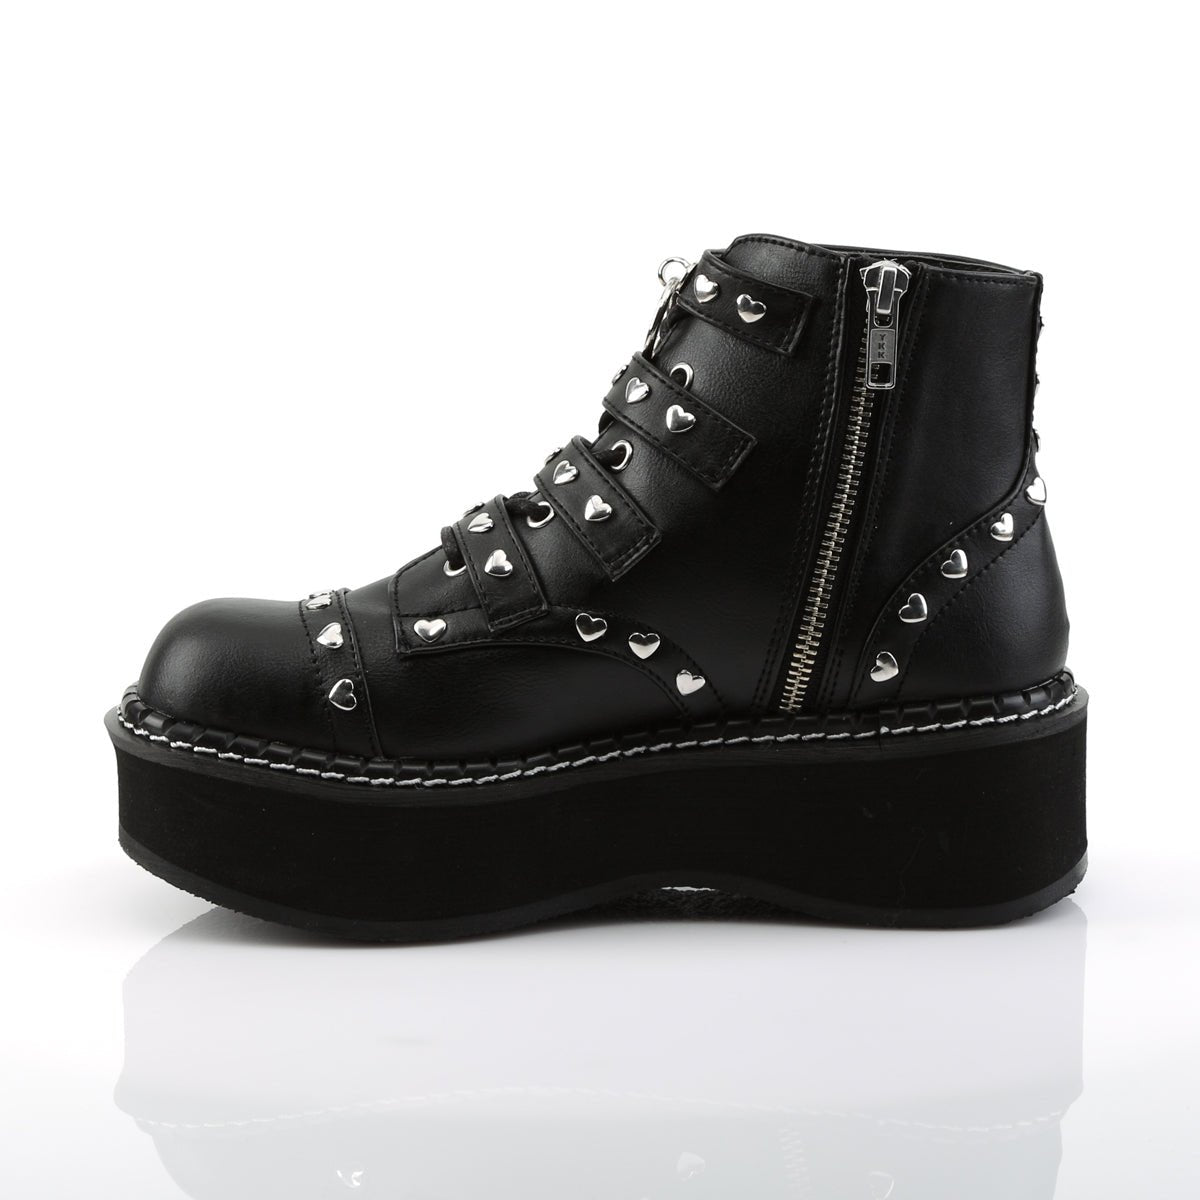 Too Fast | Demonia Emily 315 | Black Vegan Leather Women's Ankle Boots